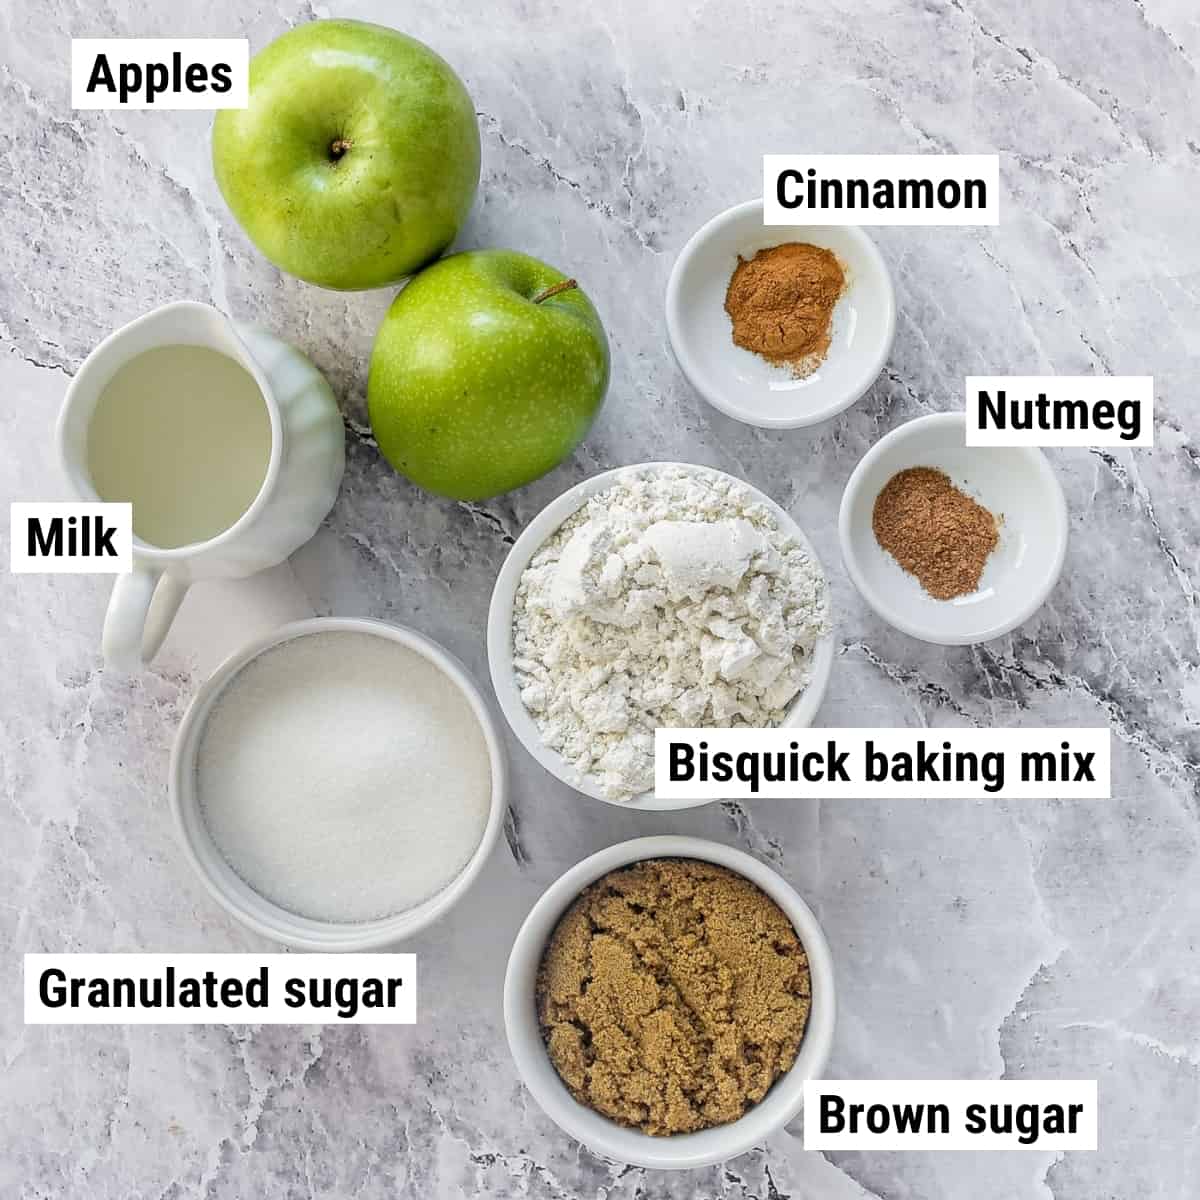 The ingredients for bisquick apple cobbler spread out on a table.